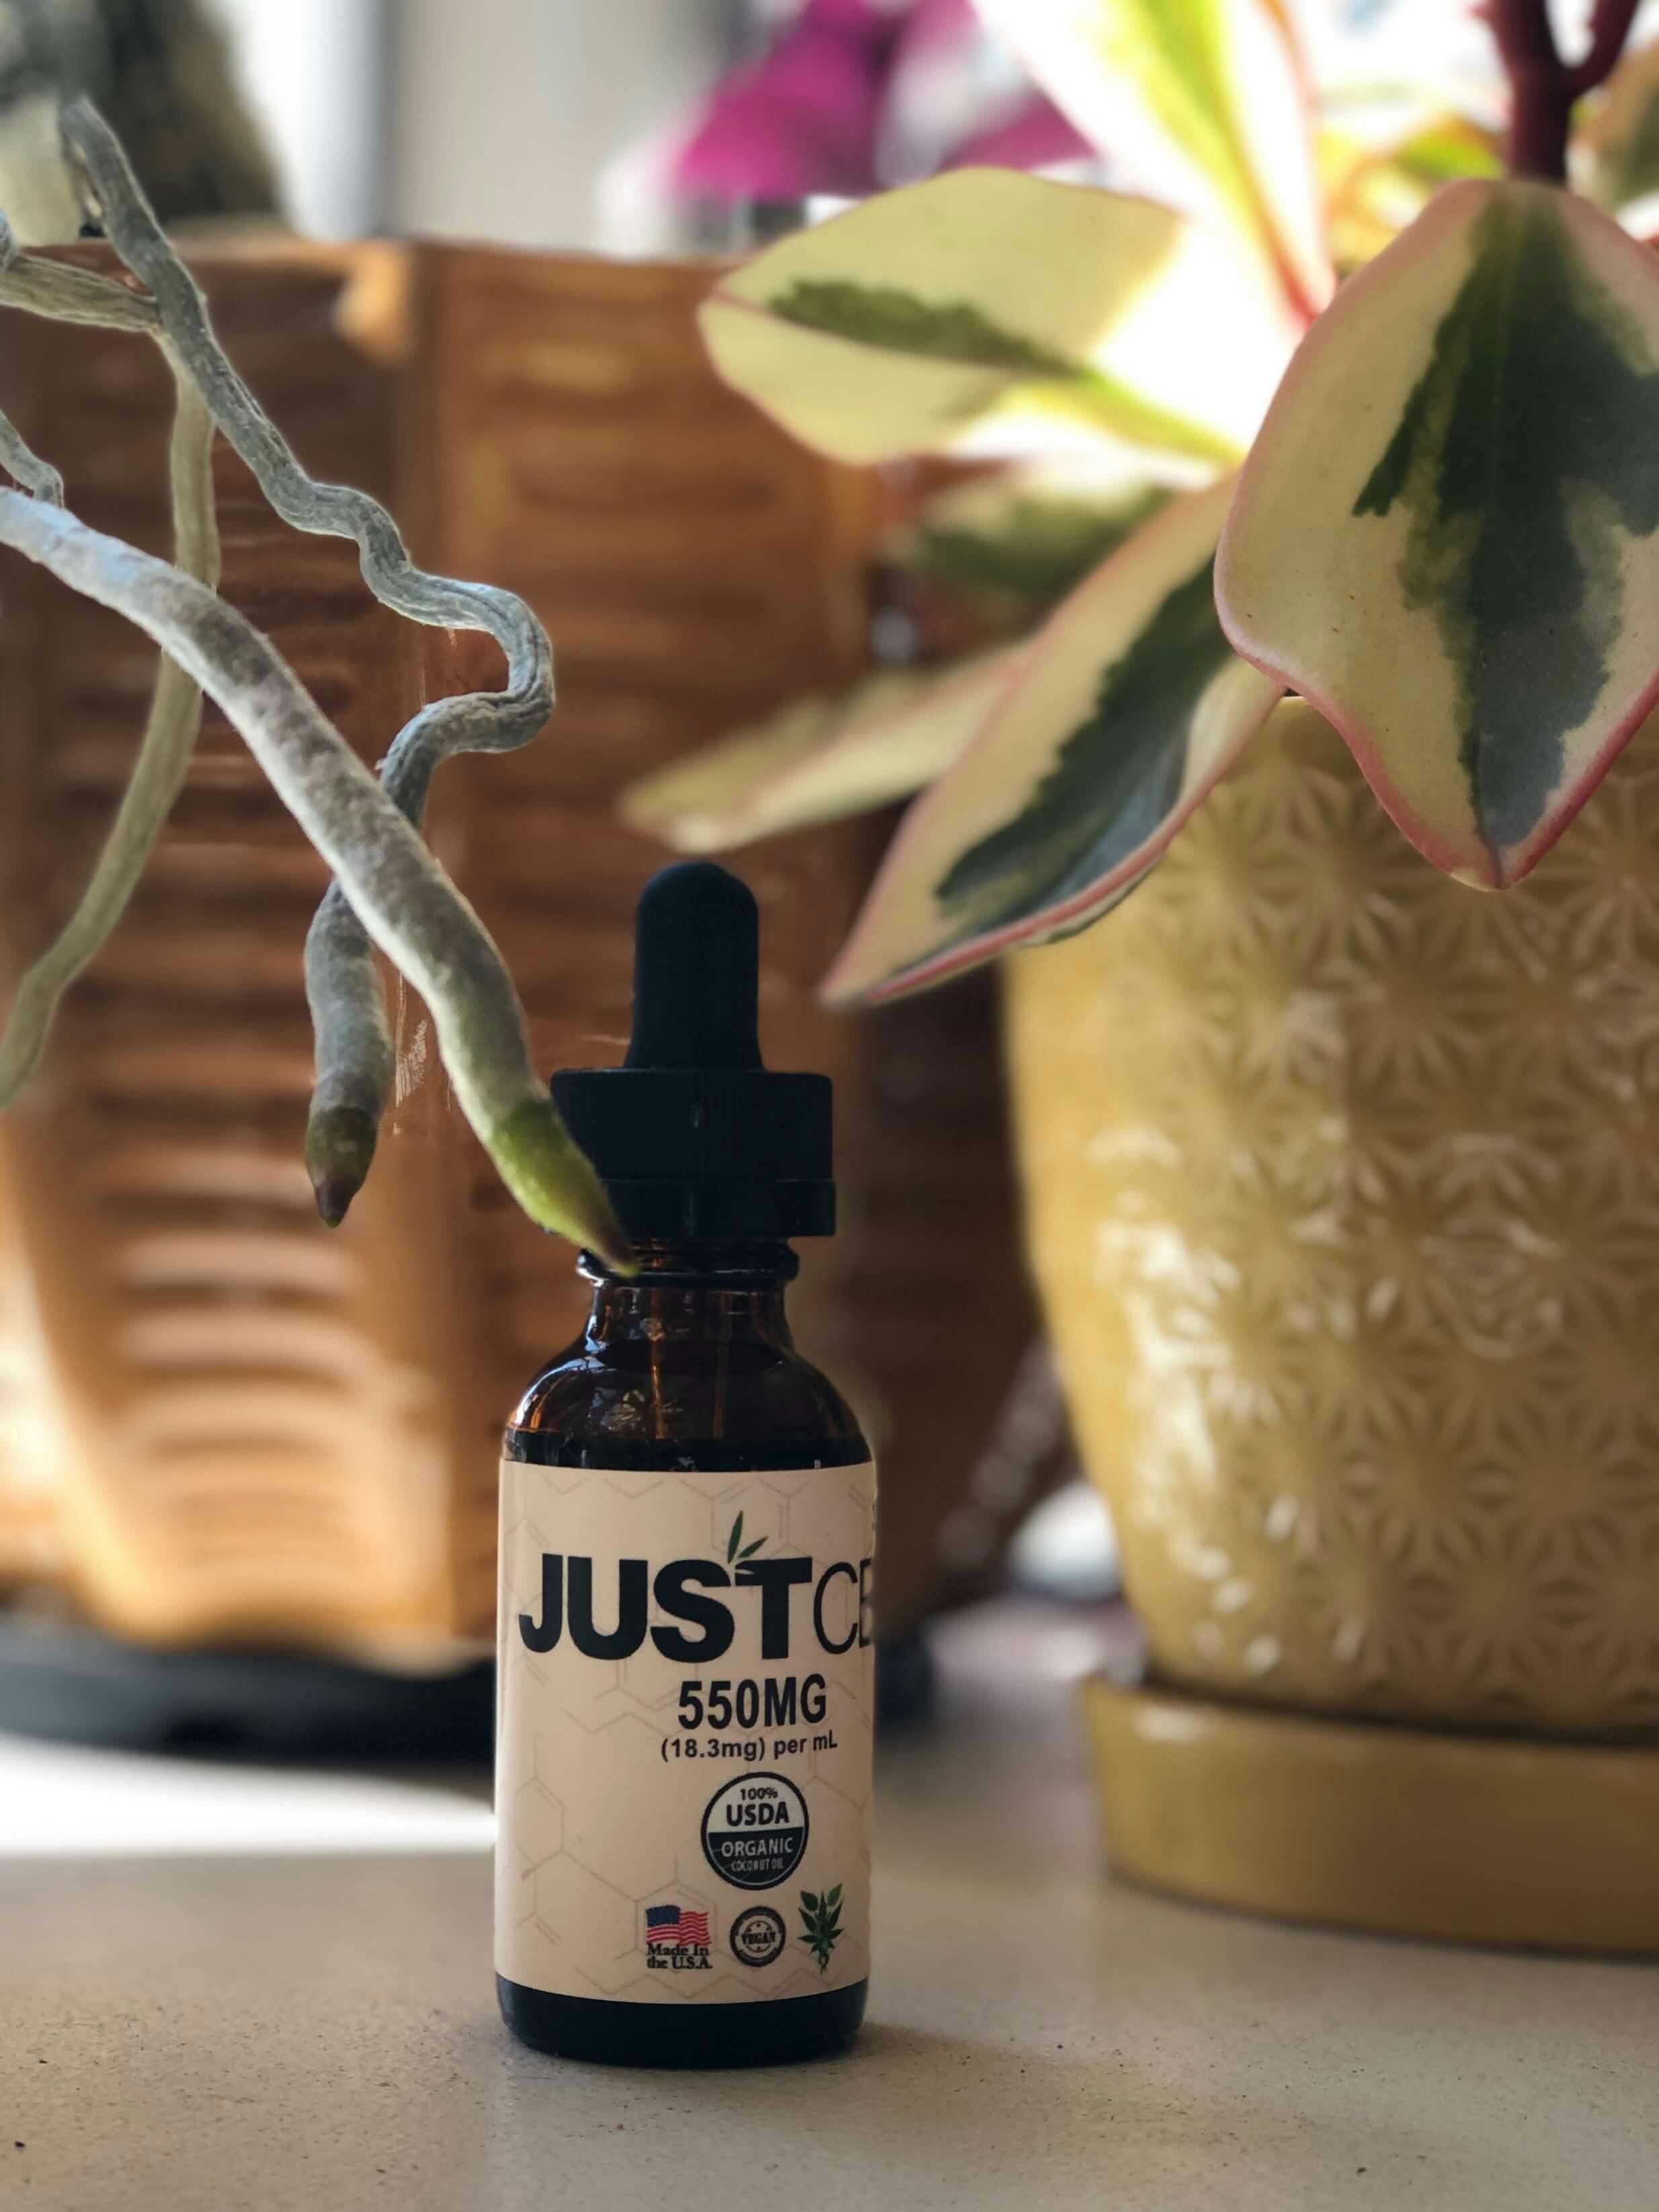 A bottle of JUSTcbd tincture